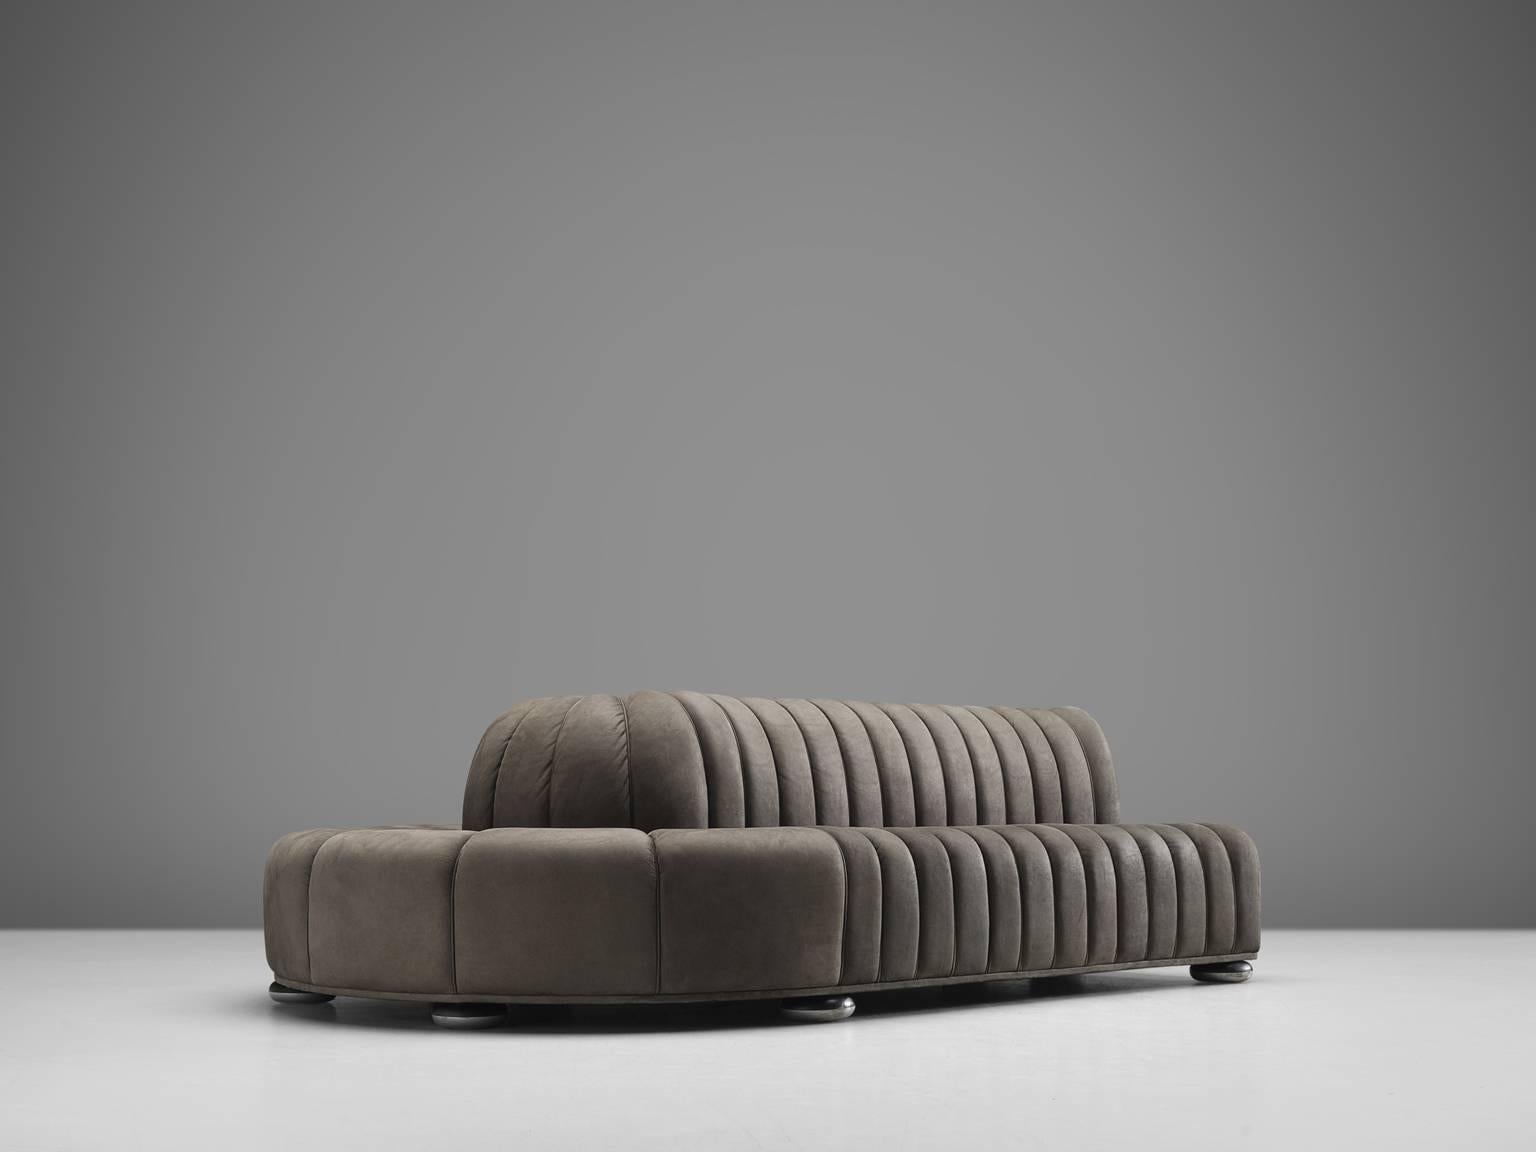 Custom-Made Luxurious Wittmann Sofa in Anthracite Leather (Postmoderne)